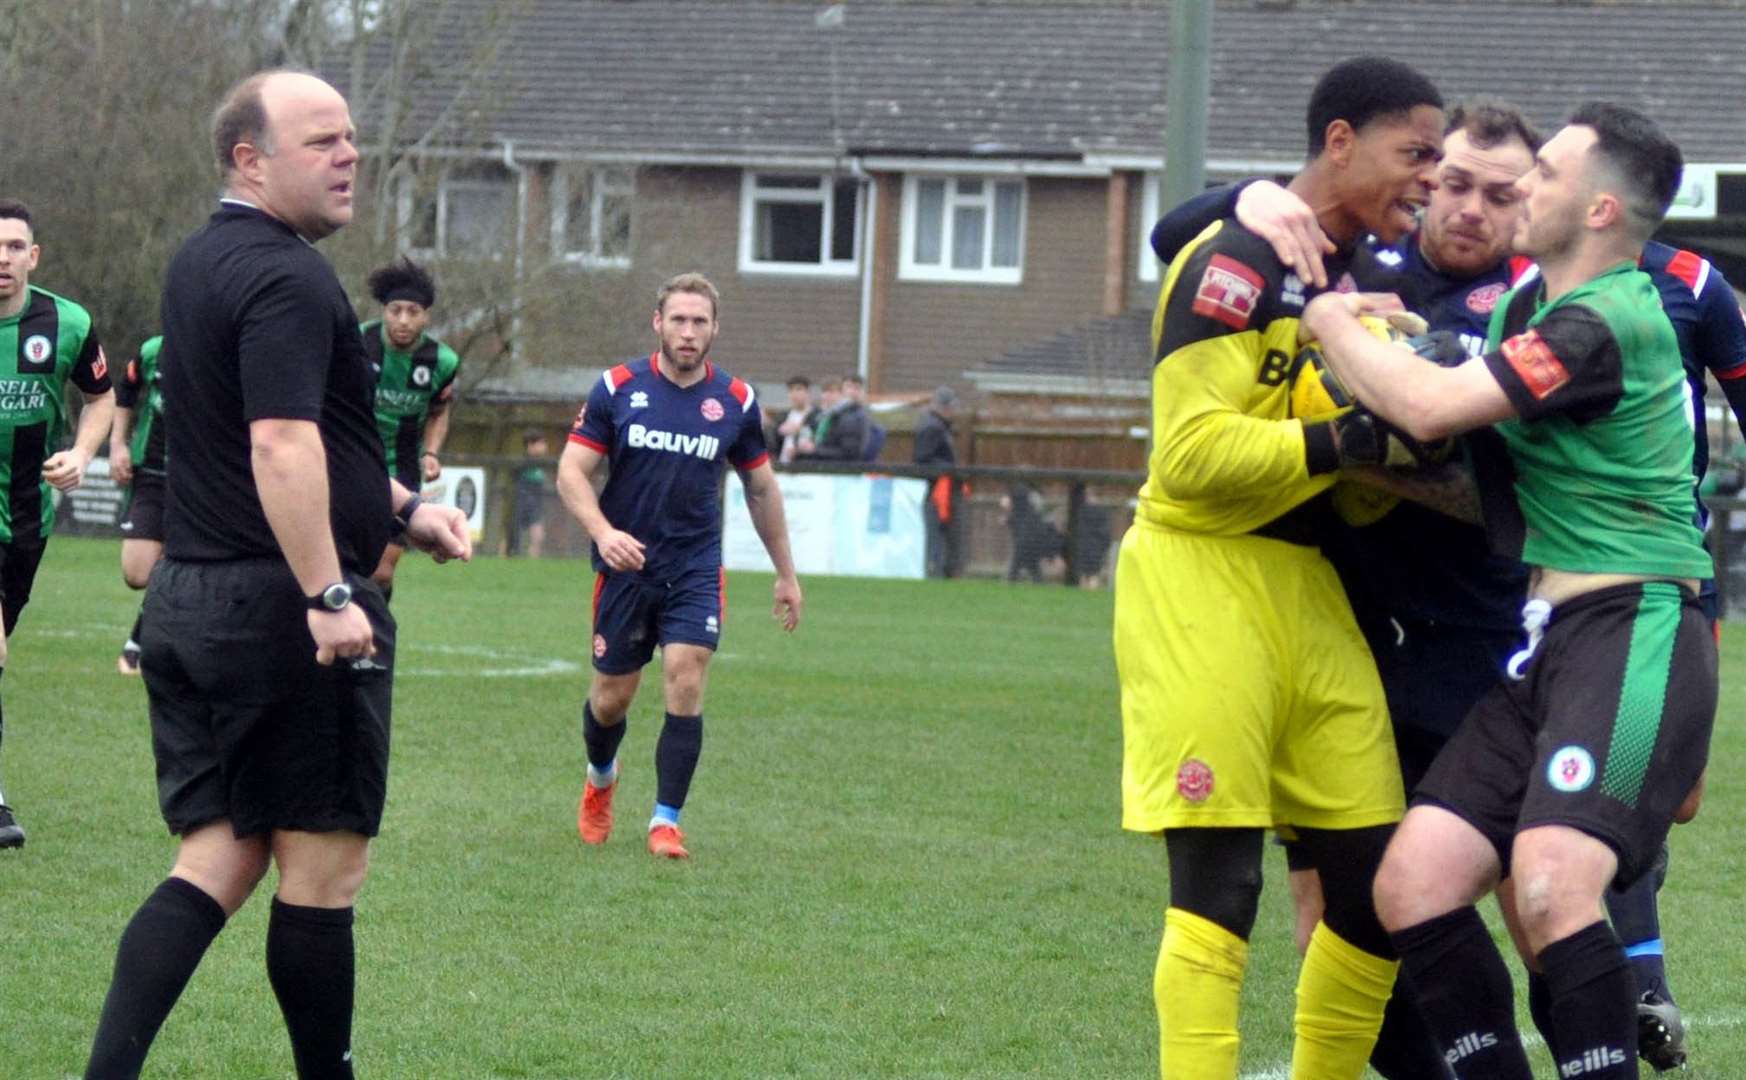 Chatham goalkeeper Nathan Harvey is sent off in their win at Burgess Hill after this scuffle. Picture: Phillip Dennett